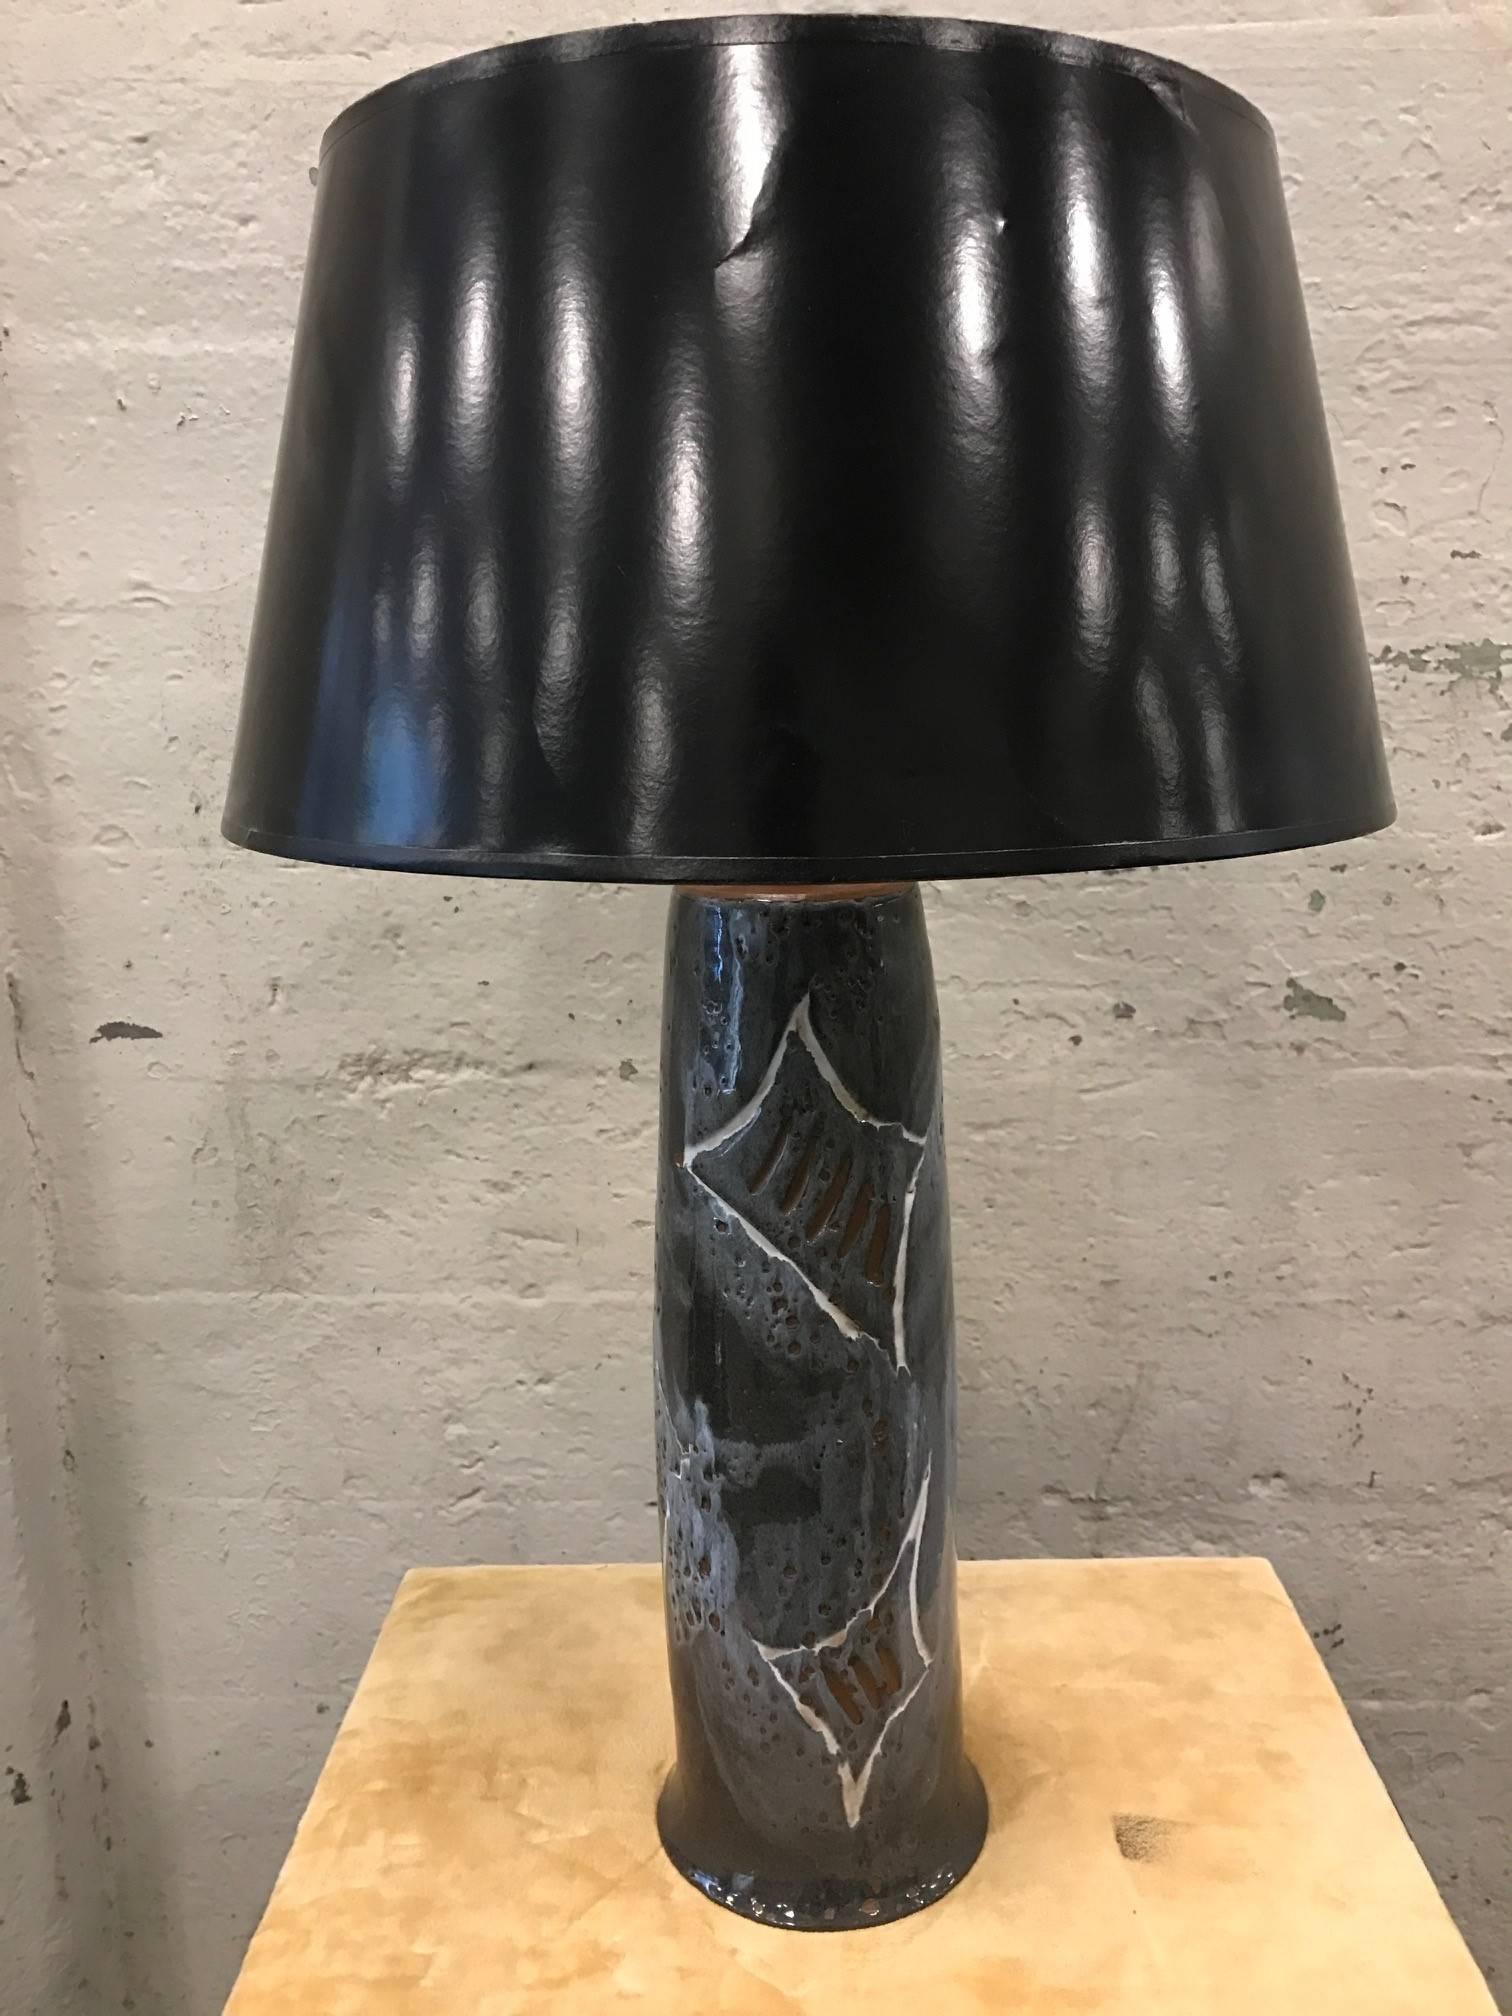 Mid-Century Modern art pottery lamp. Very nice painted abstract pattern. Style of Martz.
Shade not included.
Measures: 27H (top of finial) under bulb socket: 17.25 H; Body is 6 in diameter.